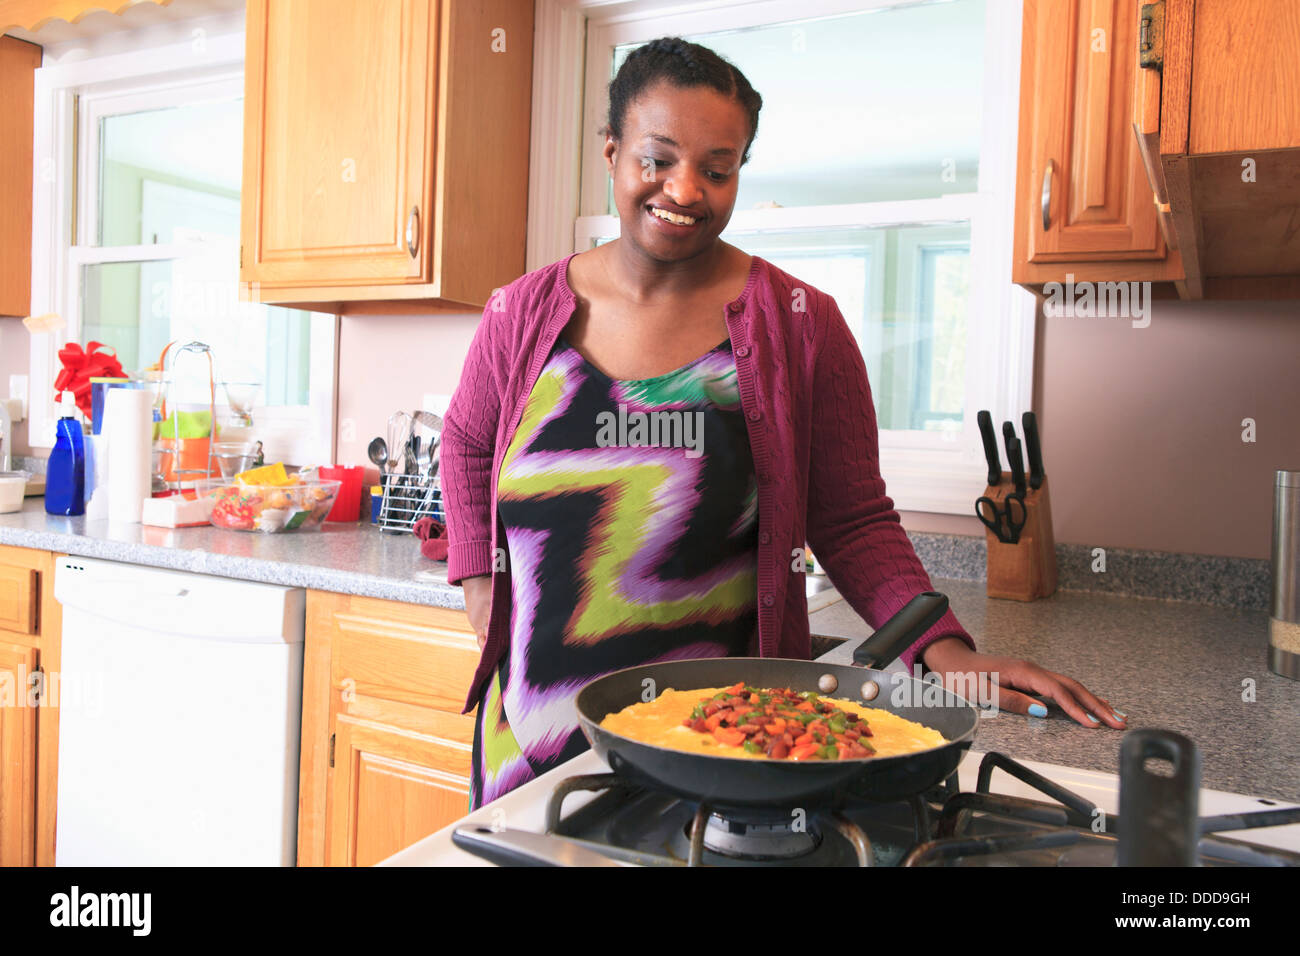 Woman with learning disability cooking in the kitchen Stock Photo